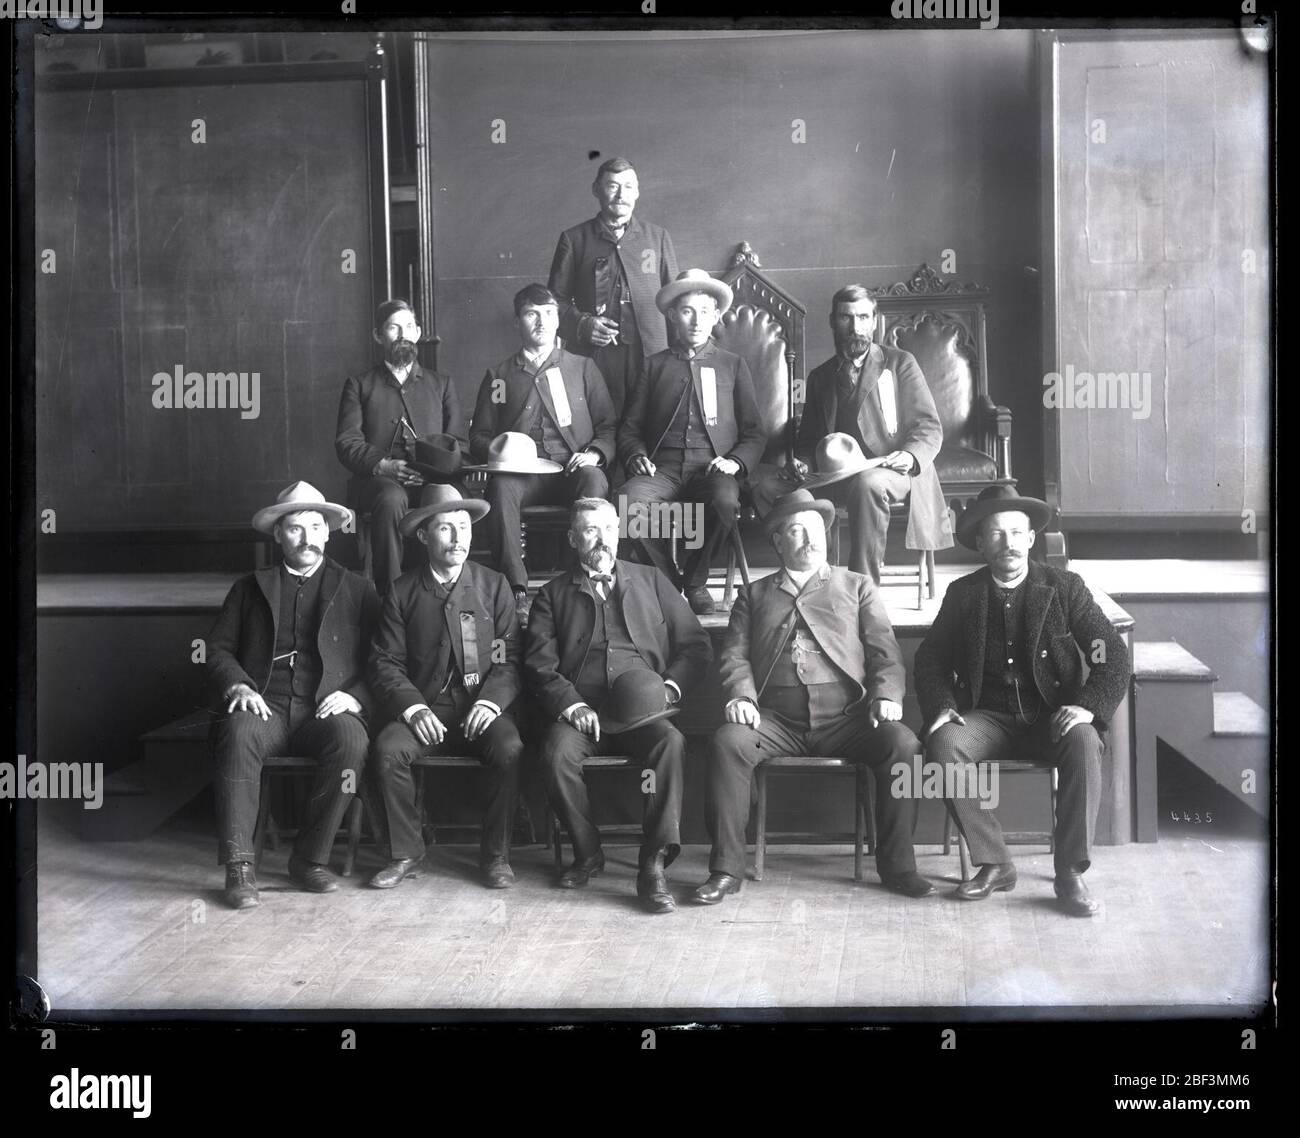 Group Portrait of North American Indian Delegation. Photographed in the Lecture Room in the West North Range of the United States National Museum, now known as the Arts and Industries Building.Smithsonian Institution Archives, Acc. 11-006, Box 013, Image No. Stock Photo